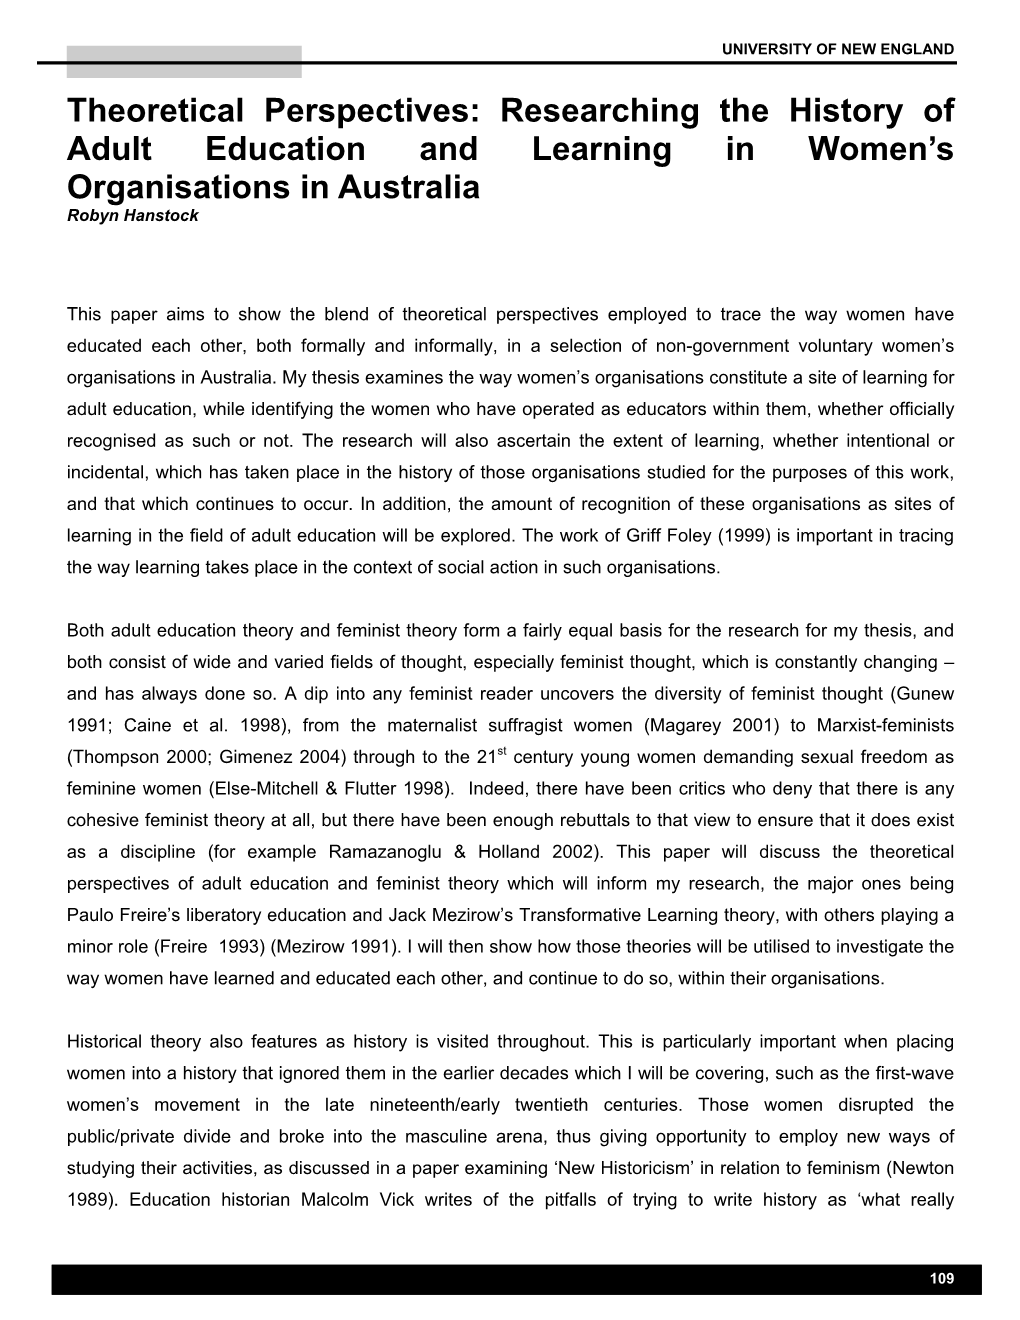 Theoretical Perspectives: Researching the History of Adult Education and Learning in Women’S Organisations in Australia Robyn Hanstock